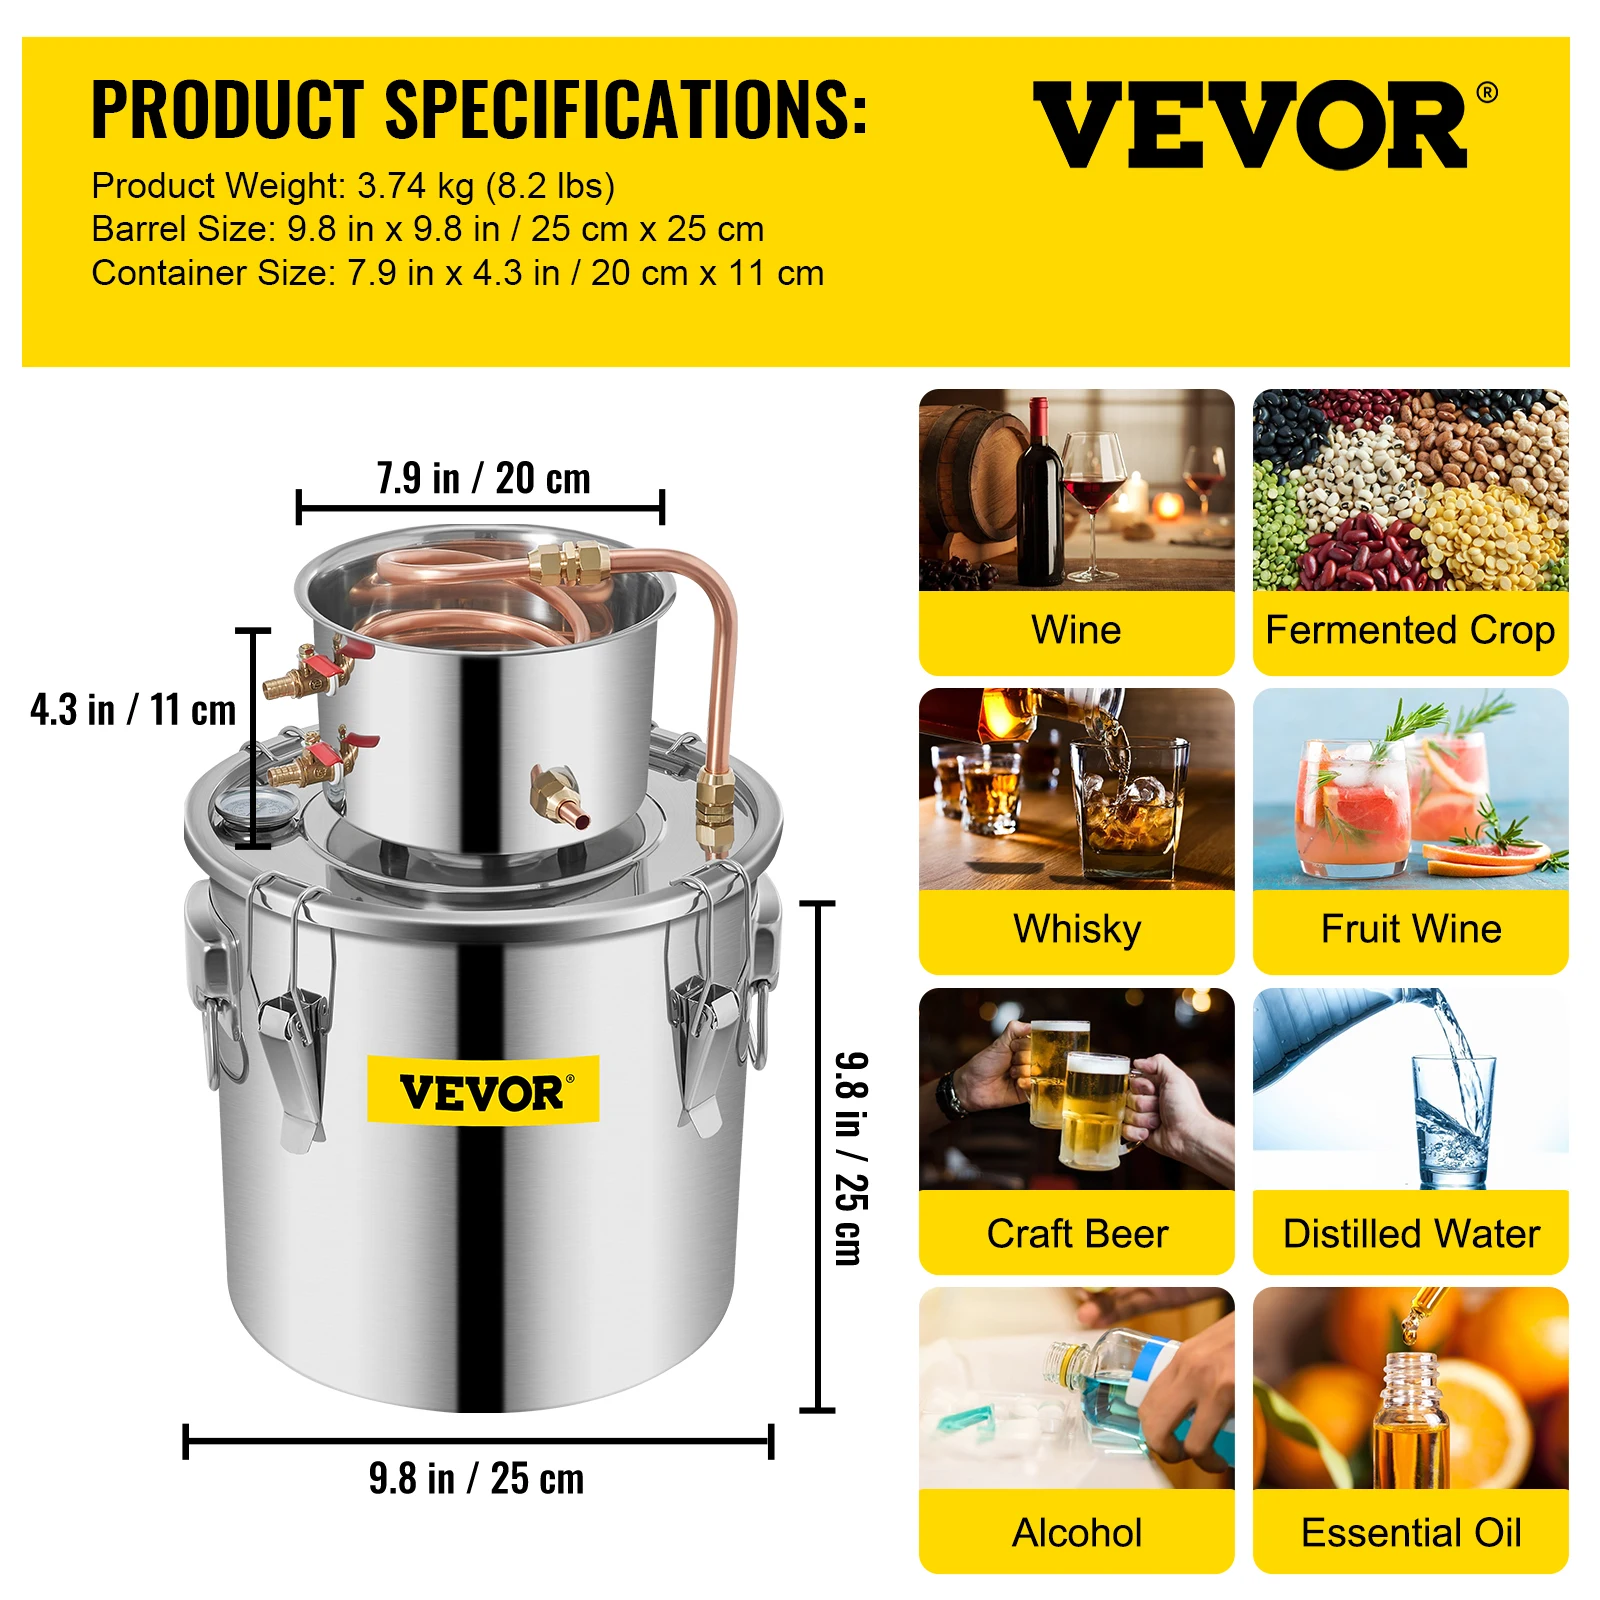 VEVOR 3 5 8 13 Gal Distiller Alambic Moonshine Alcohol Still Stainless Copper DIY Home Brew Water Wine Essential Oil Brewing Kit